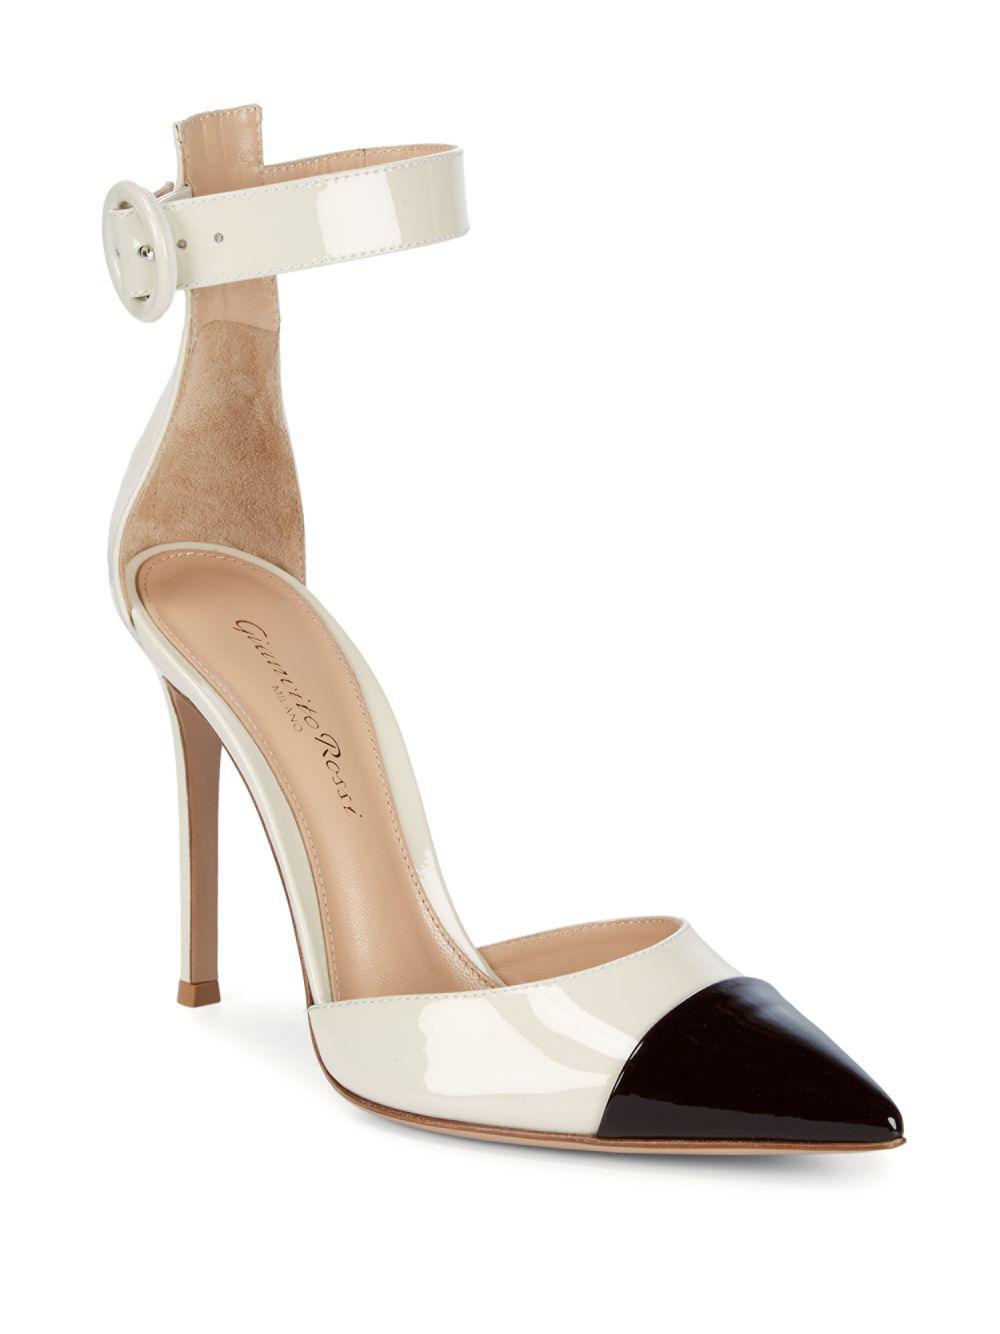 off white pumps with ankle strap